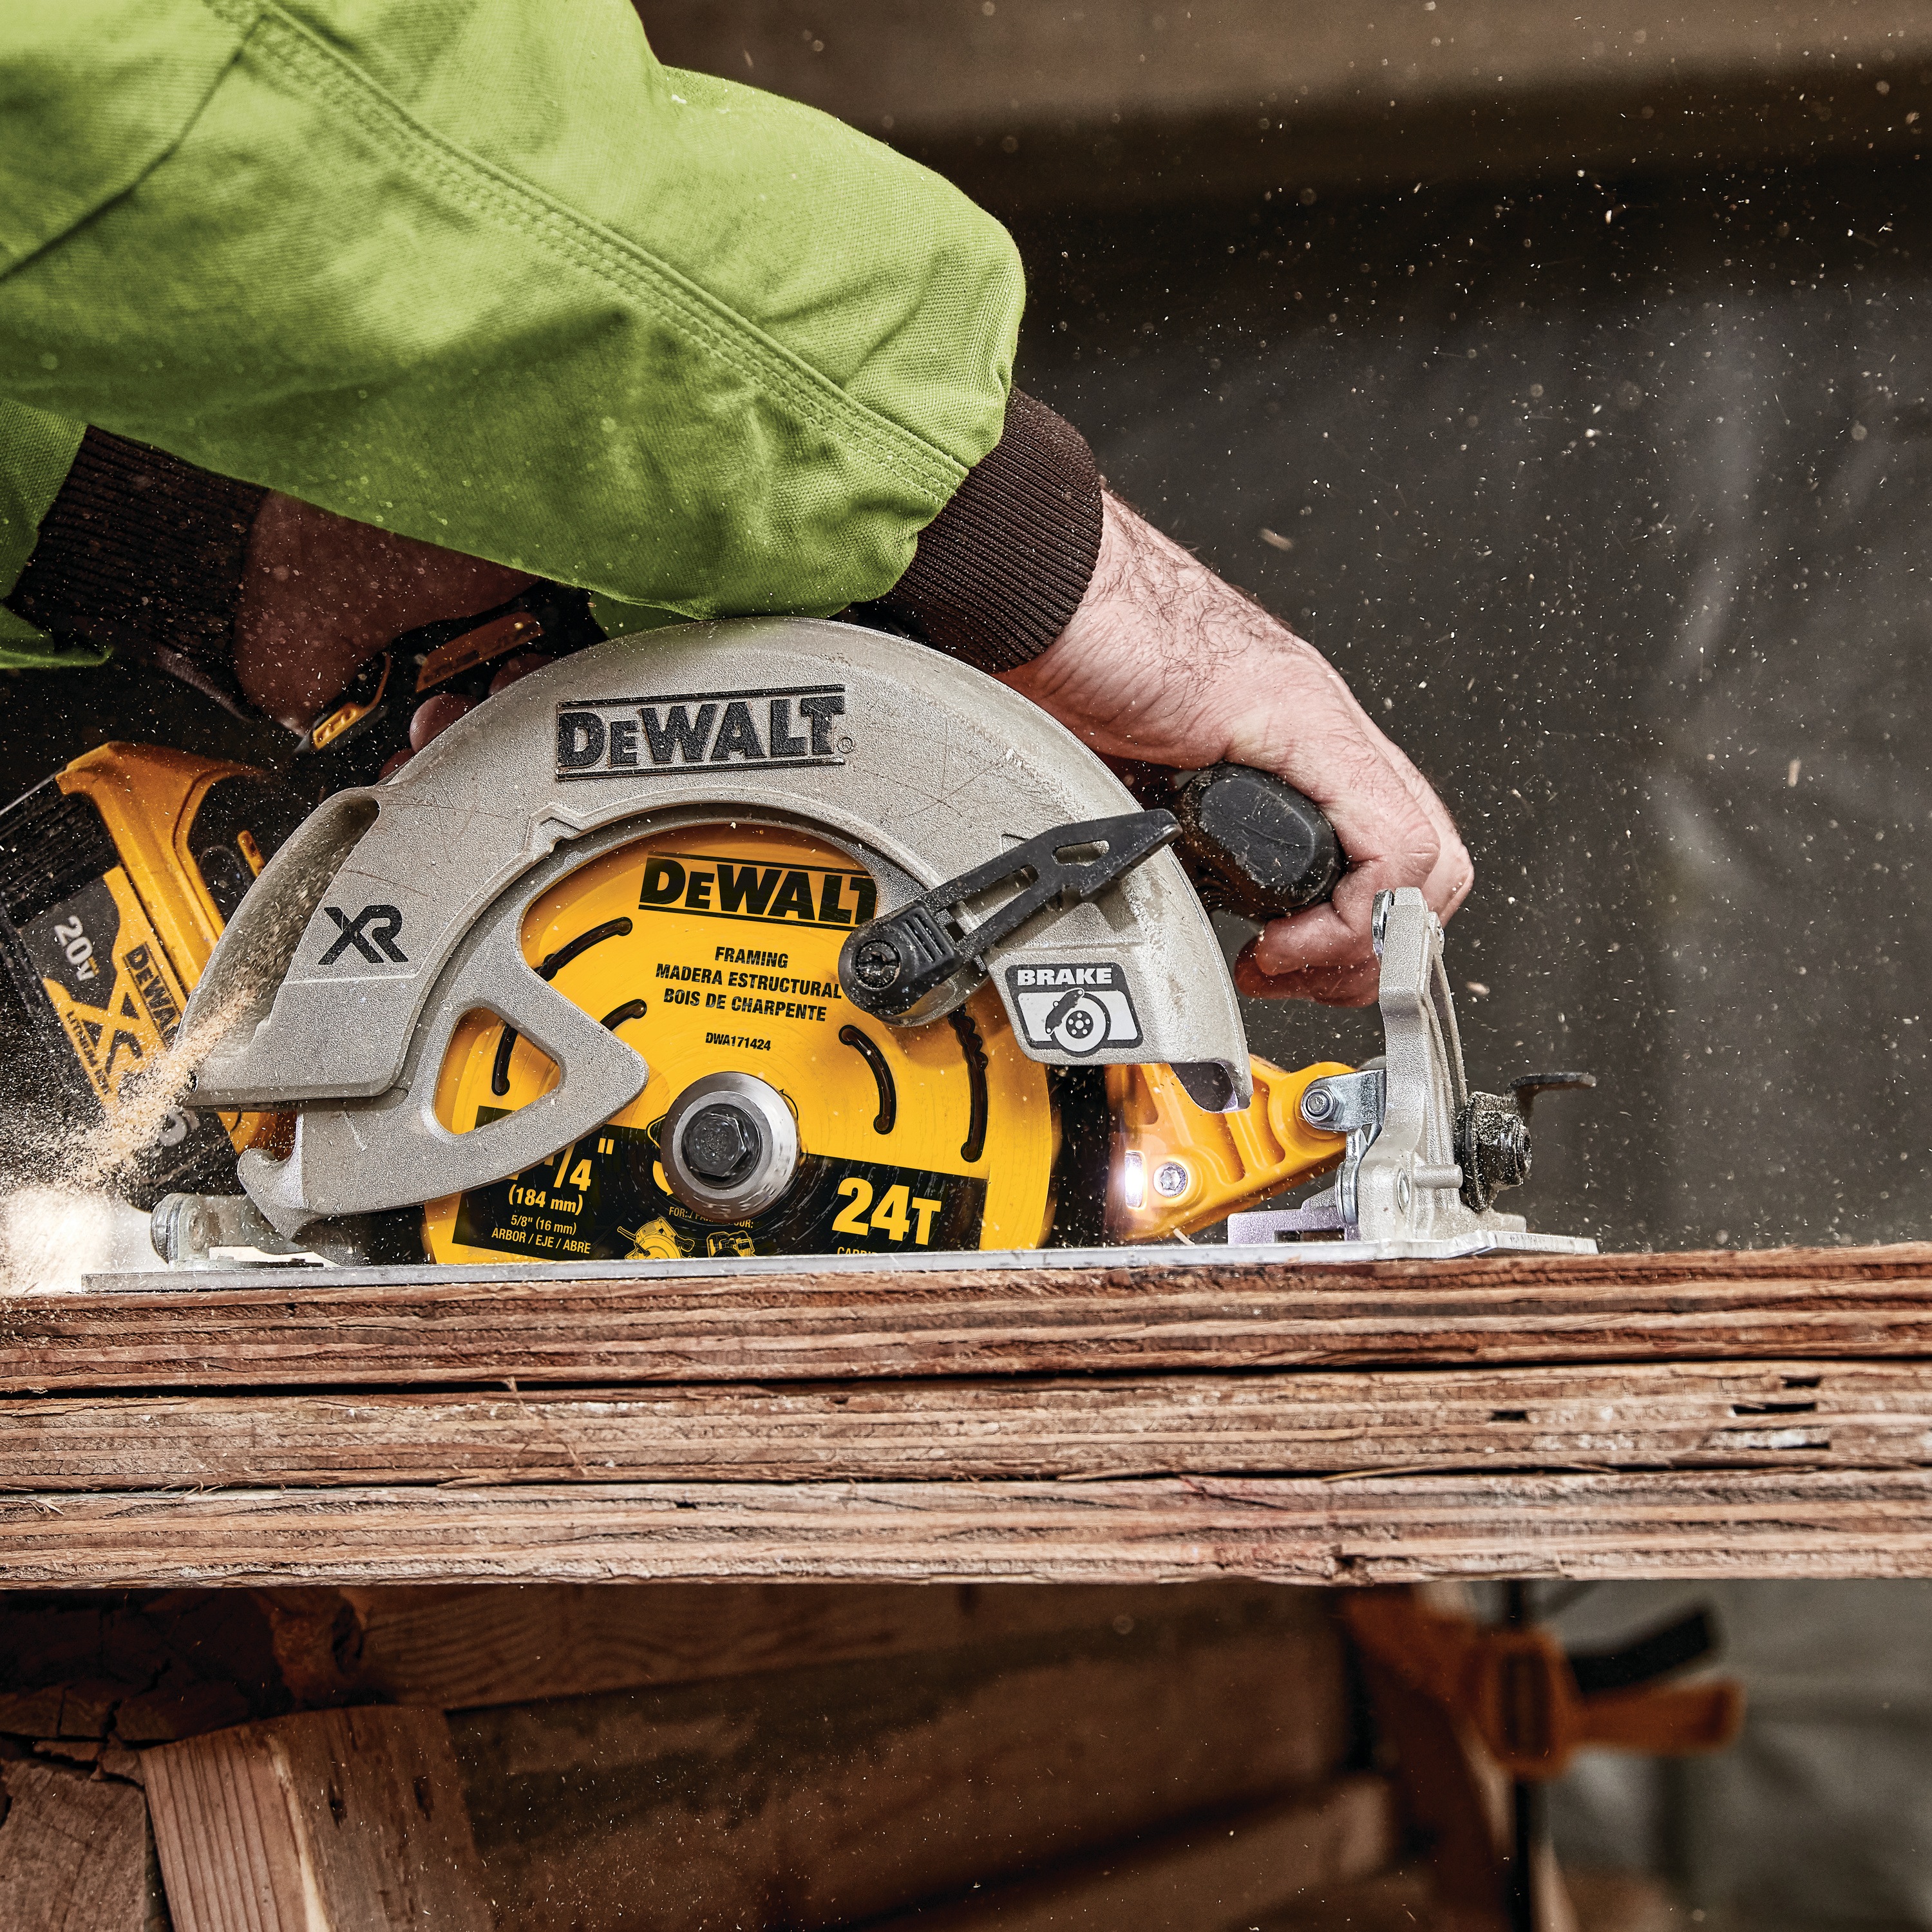 Seven and a Quarter inch Circular Saw Blades in action.